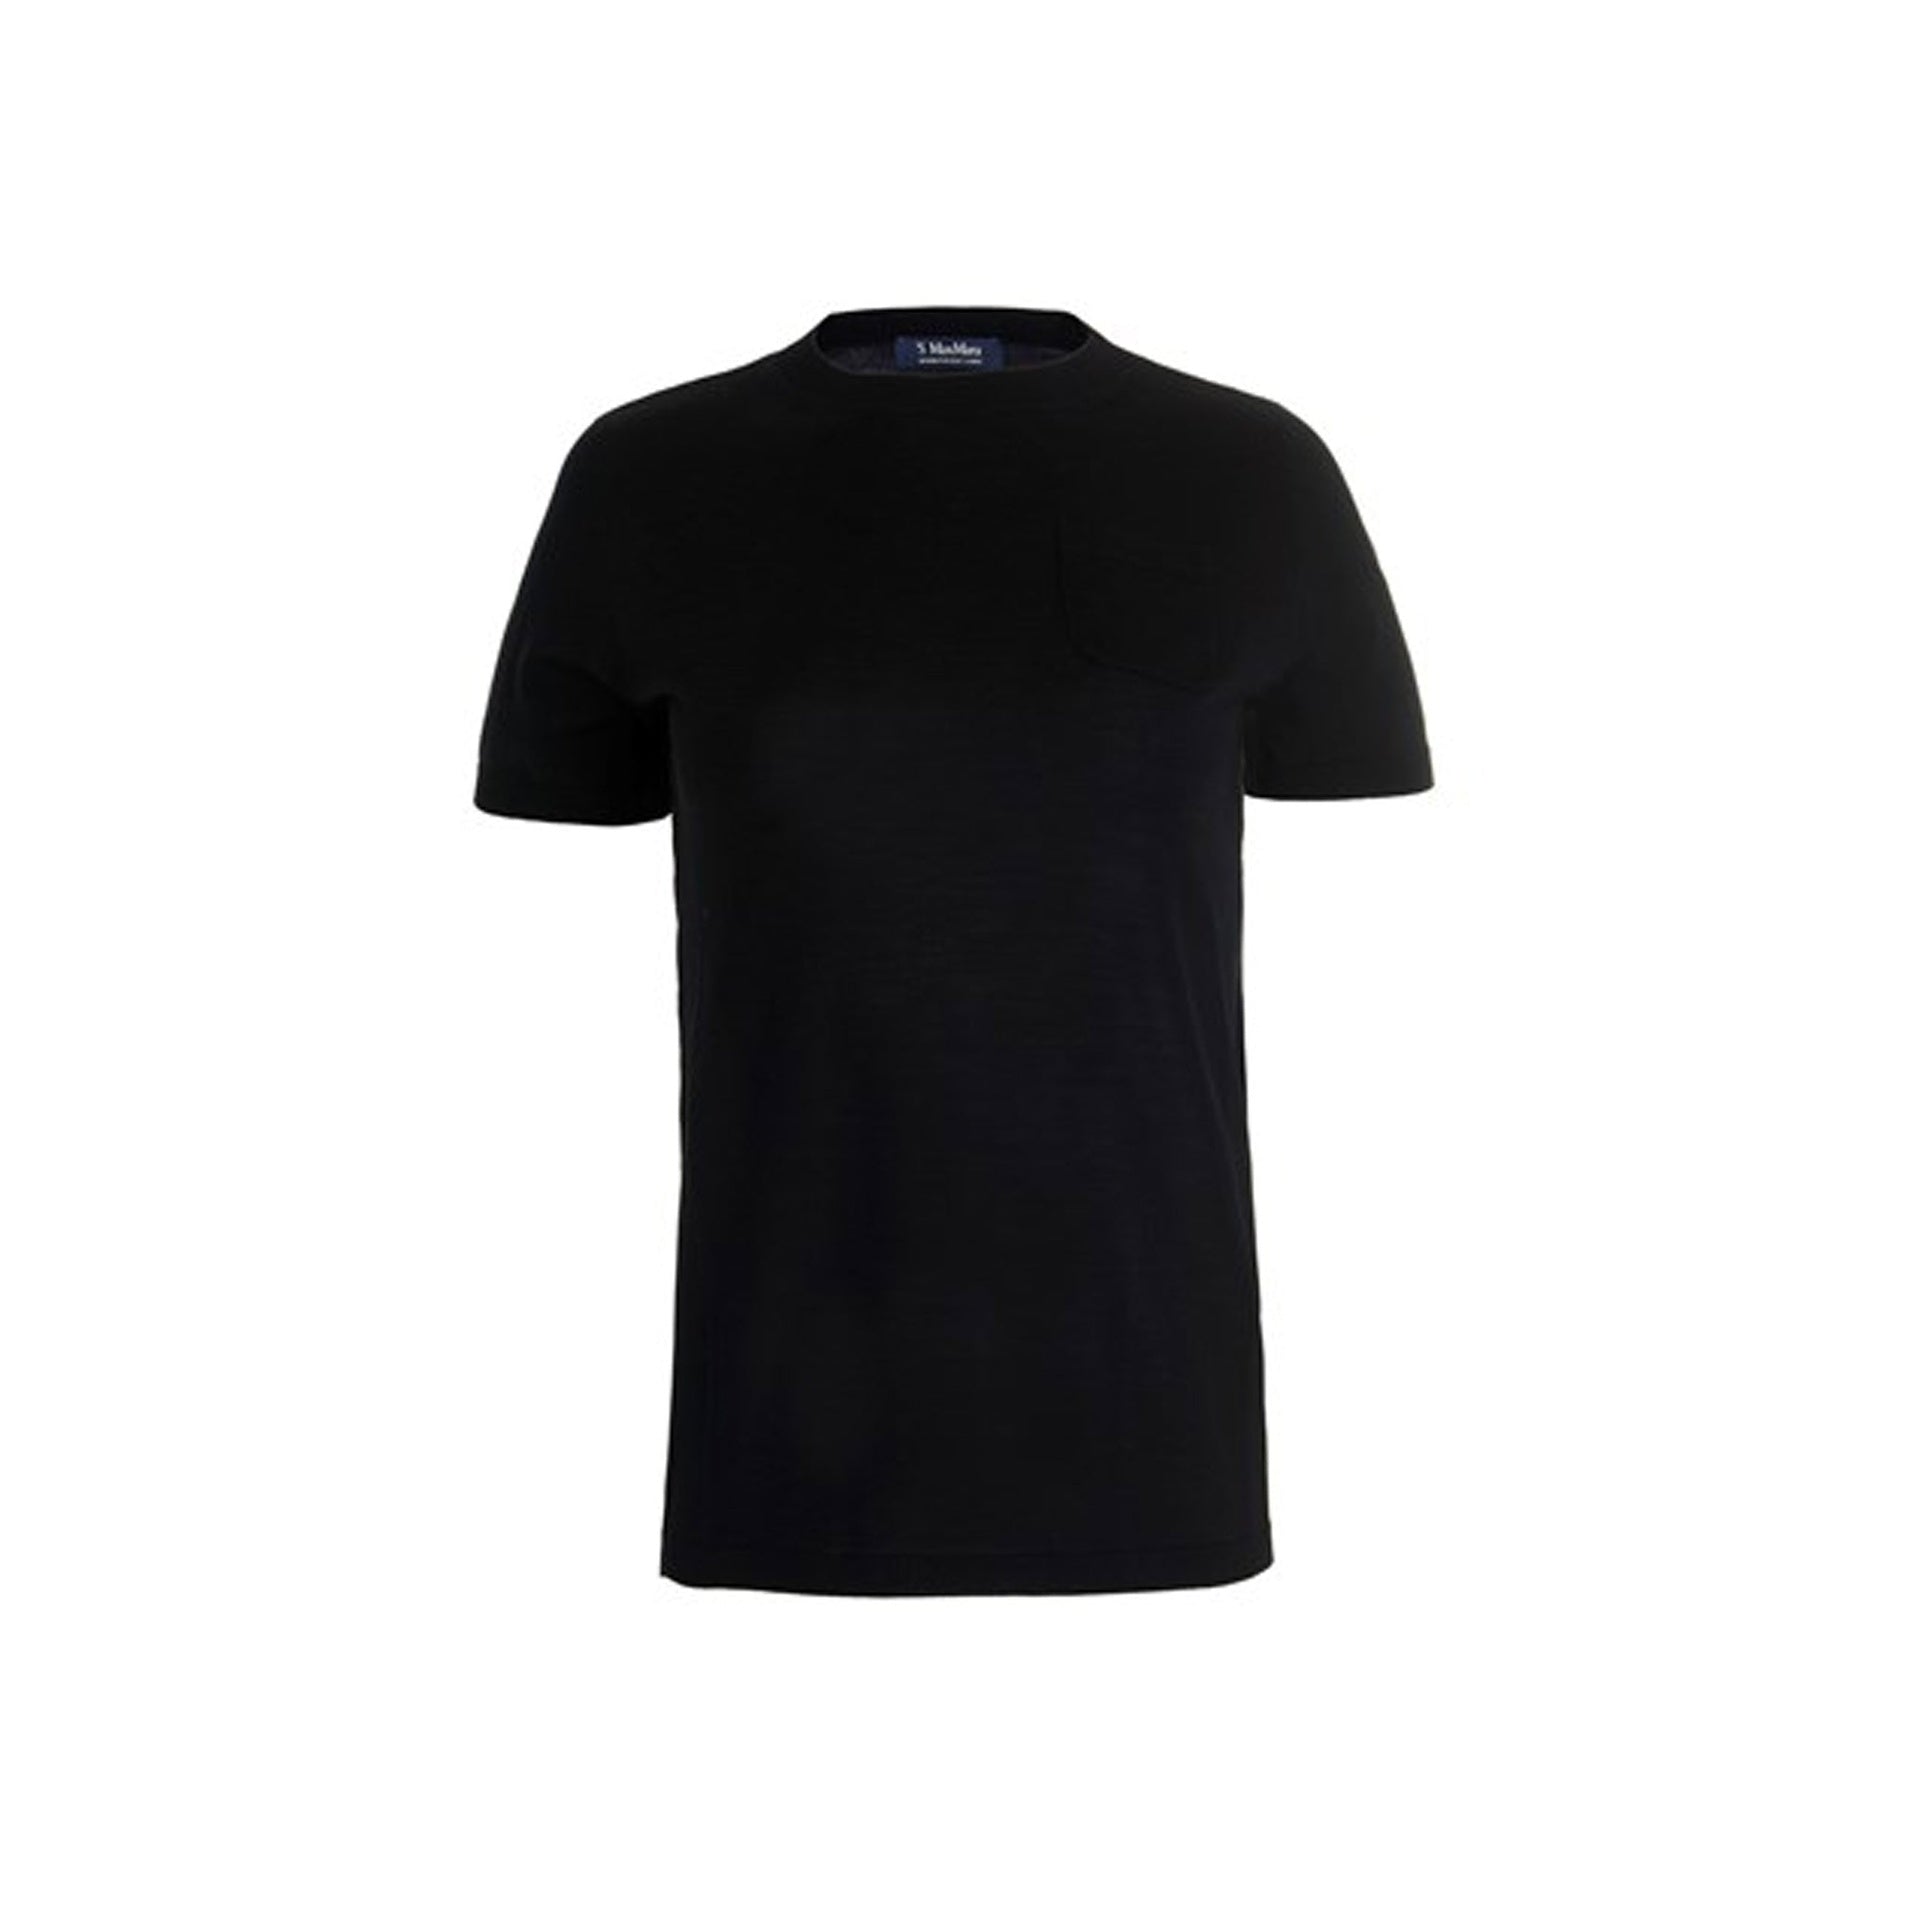 S-MAX-MARA-OUTLET-SALE-s-Max-Mara-Tea-Knitted-T-shirt-Shirts-BLACK-S-ARCHIVE-COLLECTION.jpg